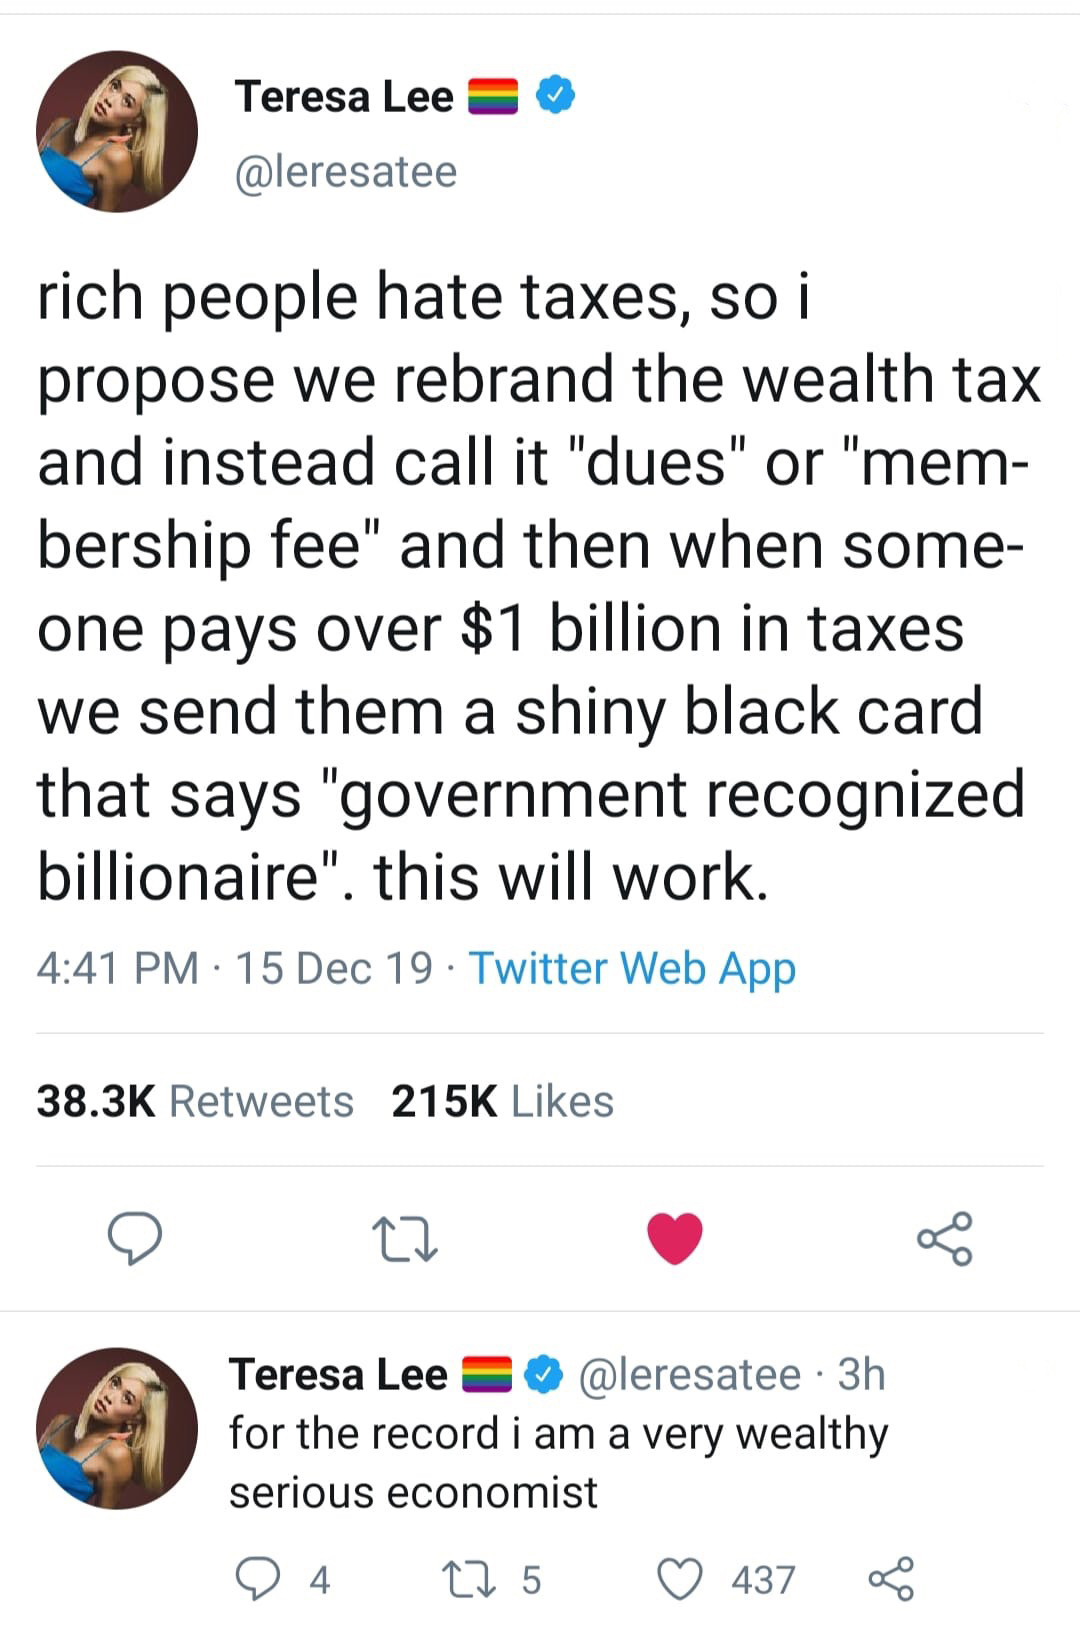 success posters - Teresa Lee rich people hate taxes, so i propose we rebrand the wealth tax and instead call it "dues" or "mem bership fee" and then when some one pays over $1 billion in taxes we send them a shiny black card that says "government recogniz